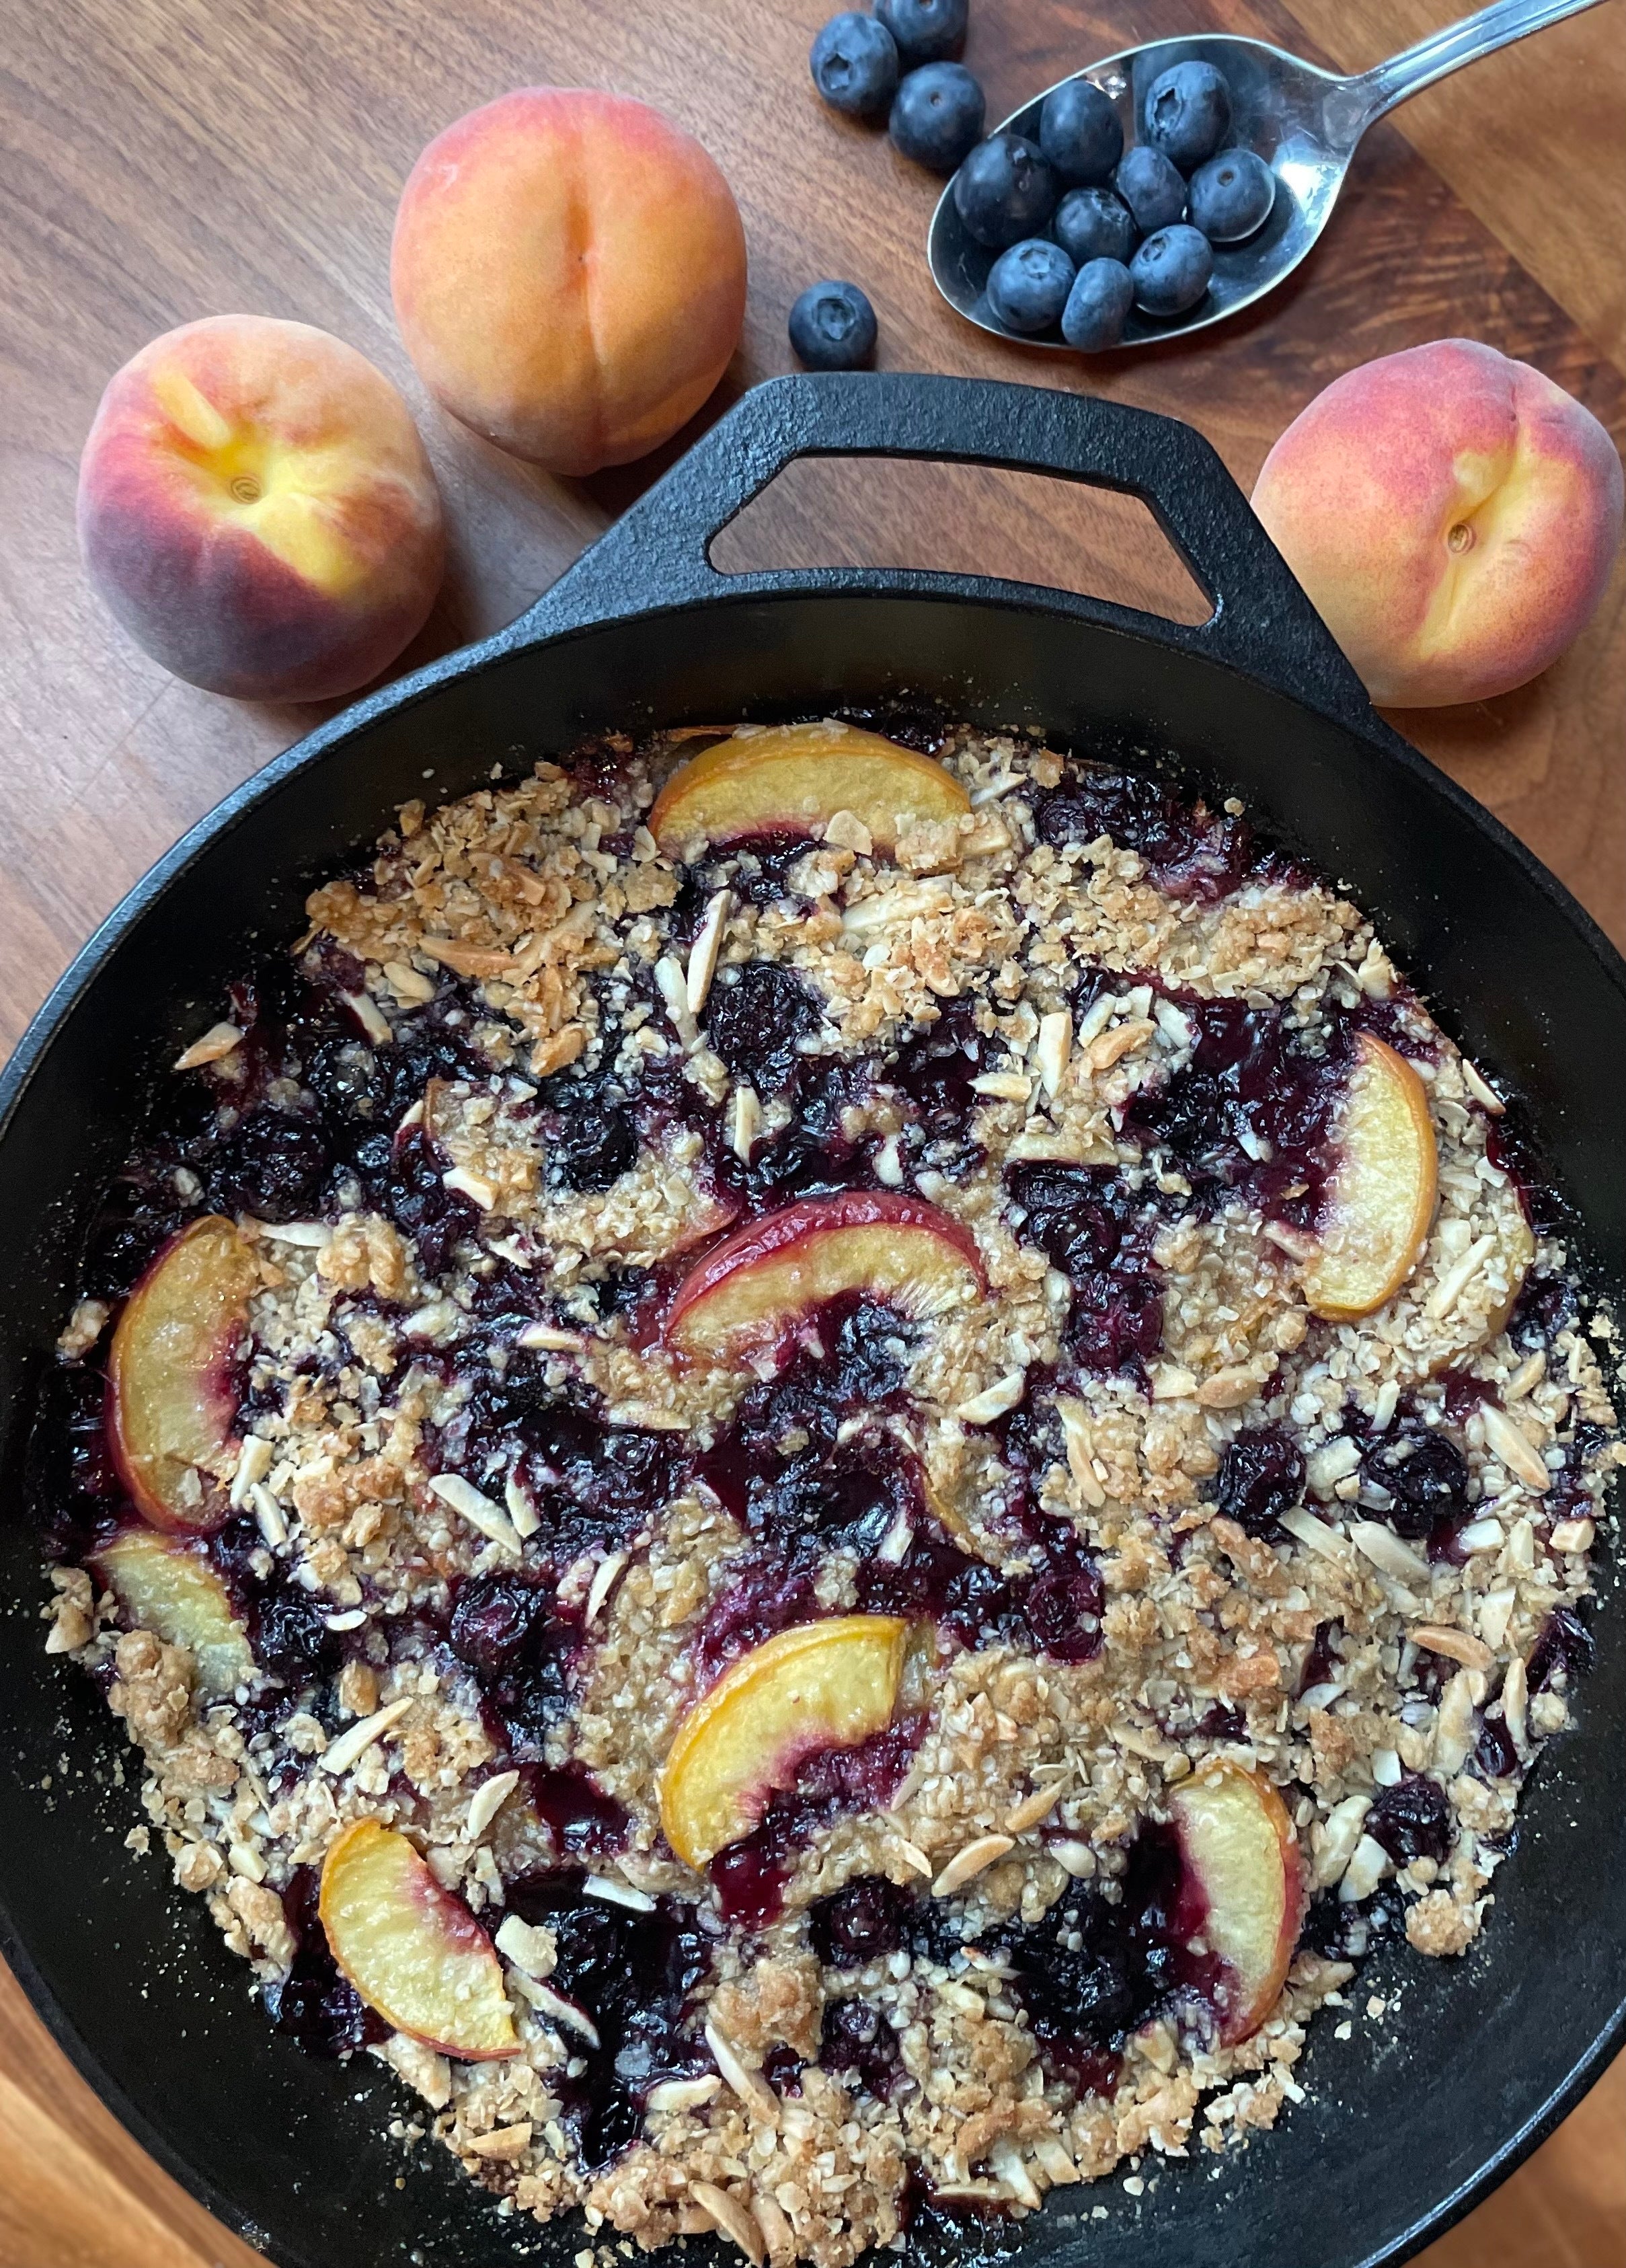 Blueberry & Peach Crisp pictured with extra peaches and blueberries